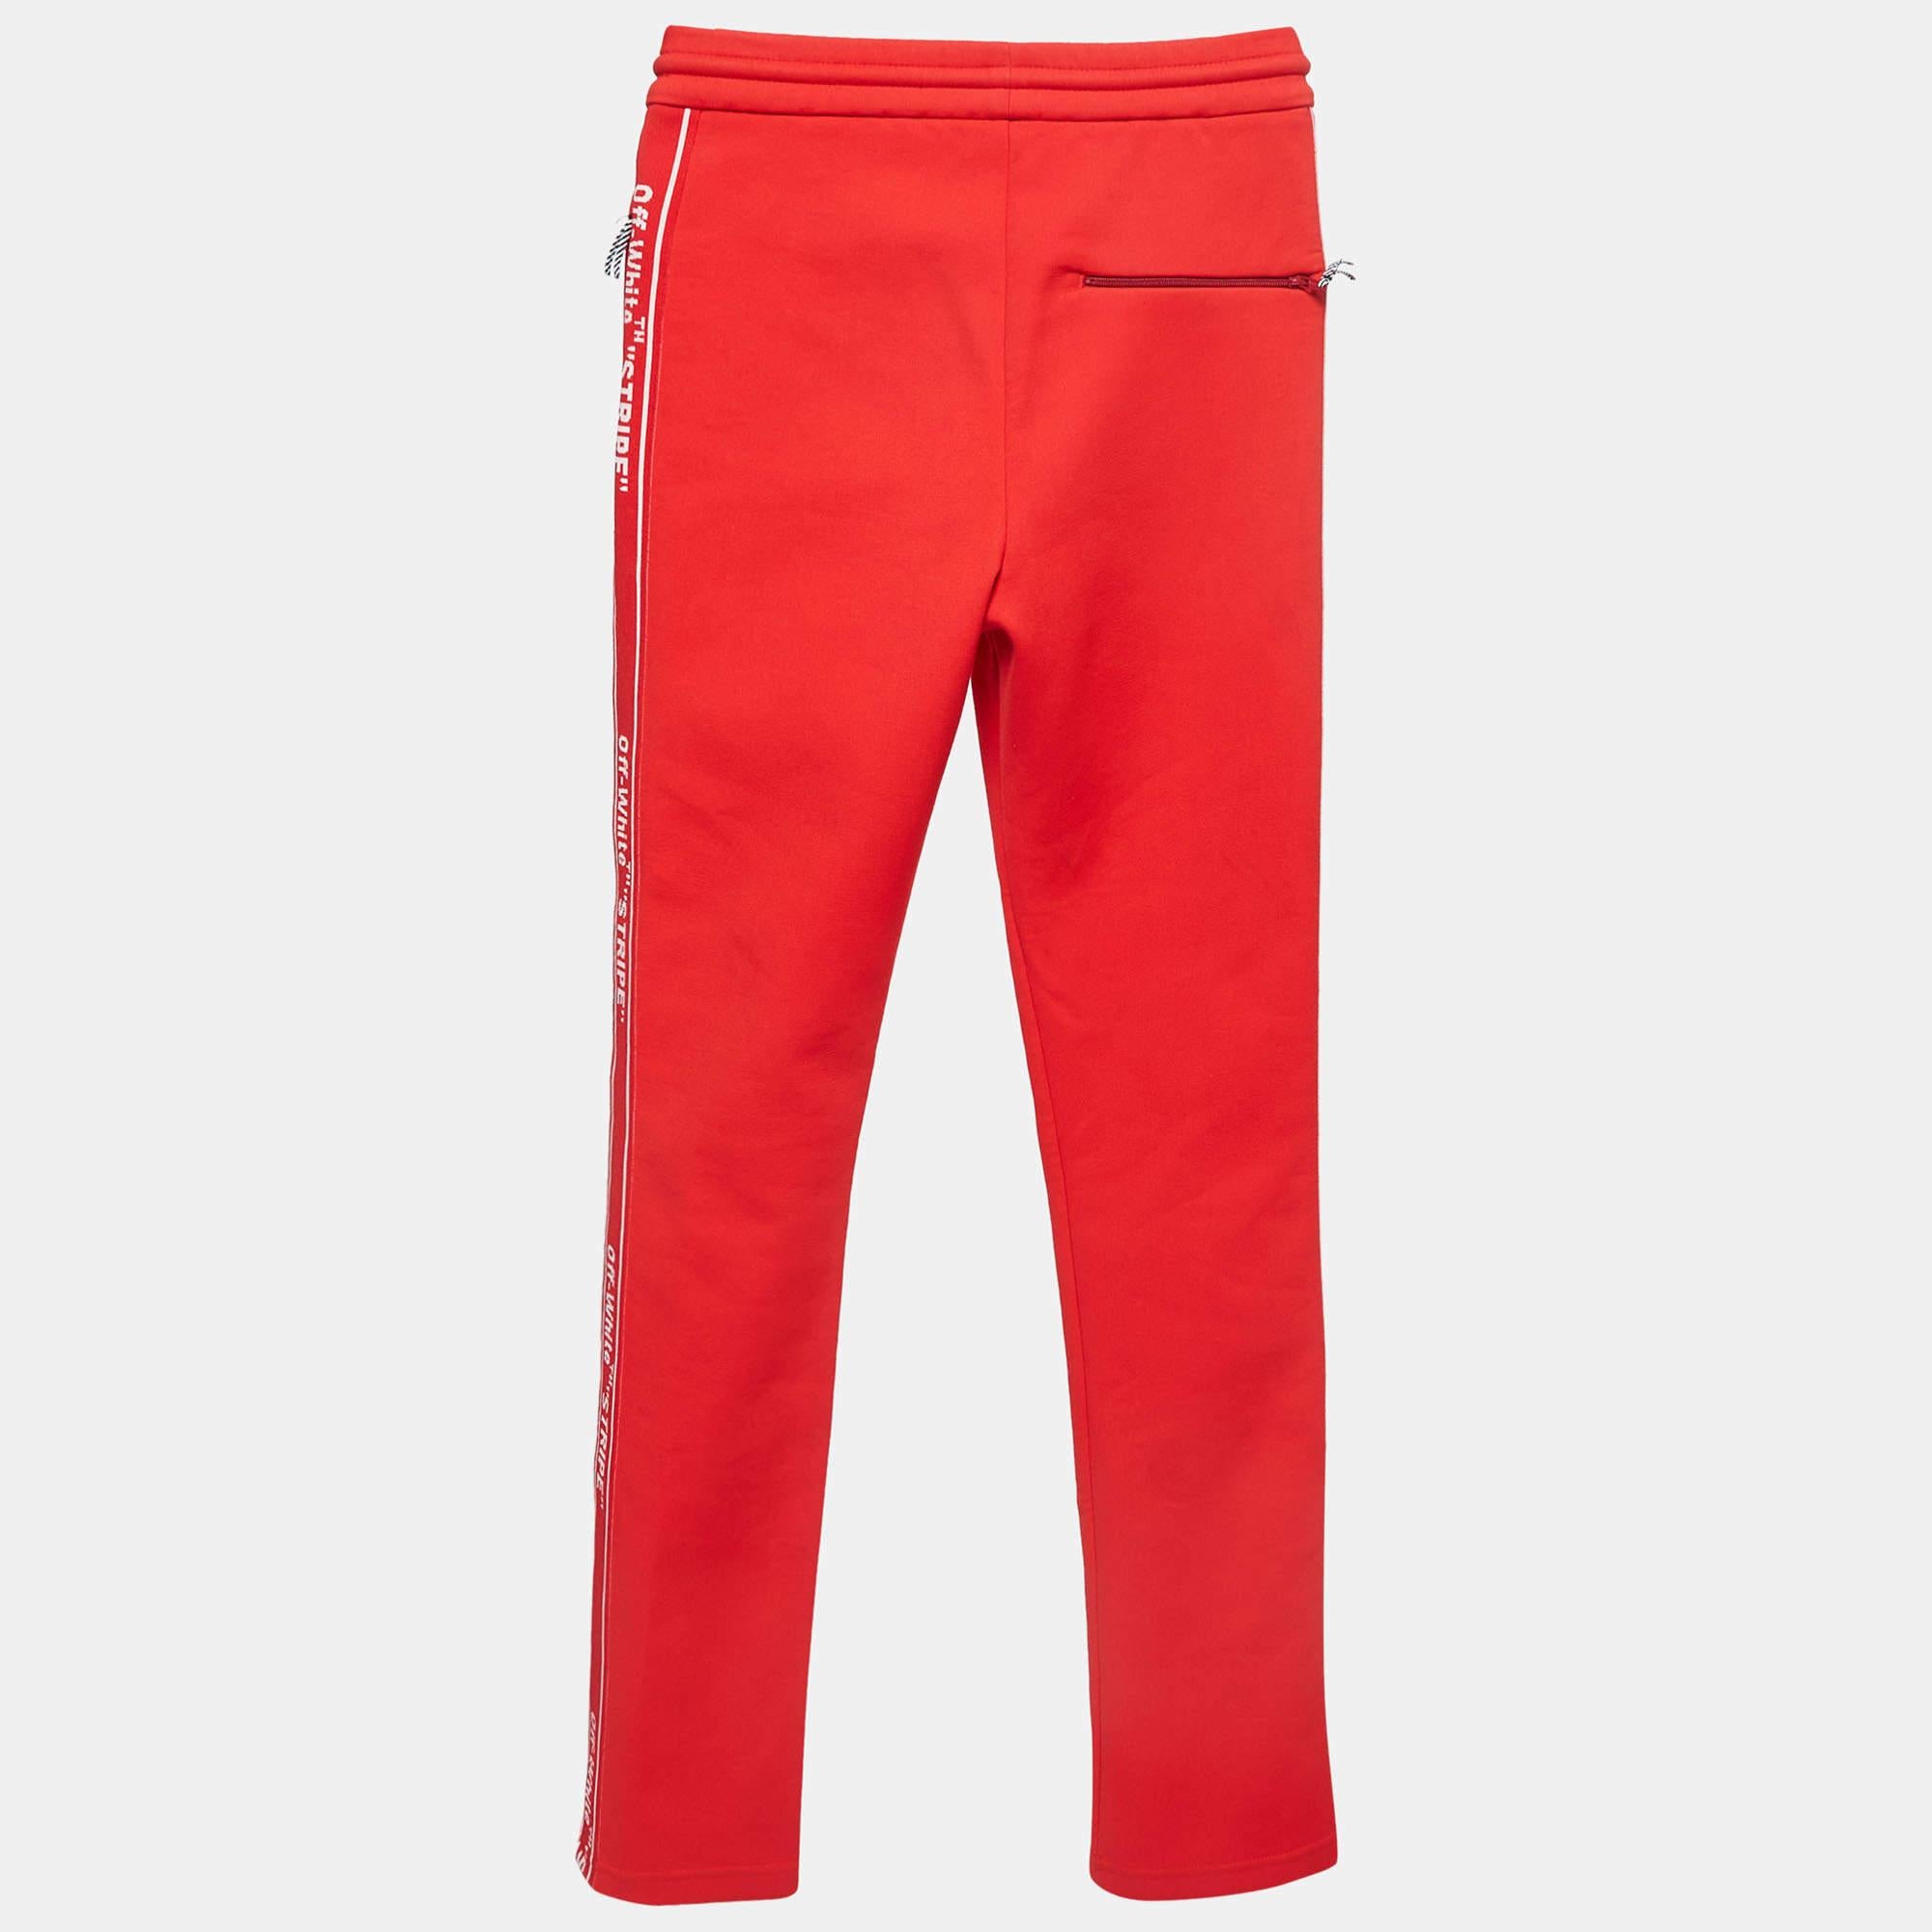 Impeccably tailored pants are a staple in a well-curated wardrobe. These designer pants are finely sewn to give you the desired look and all-day comfort.

